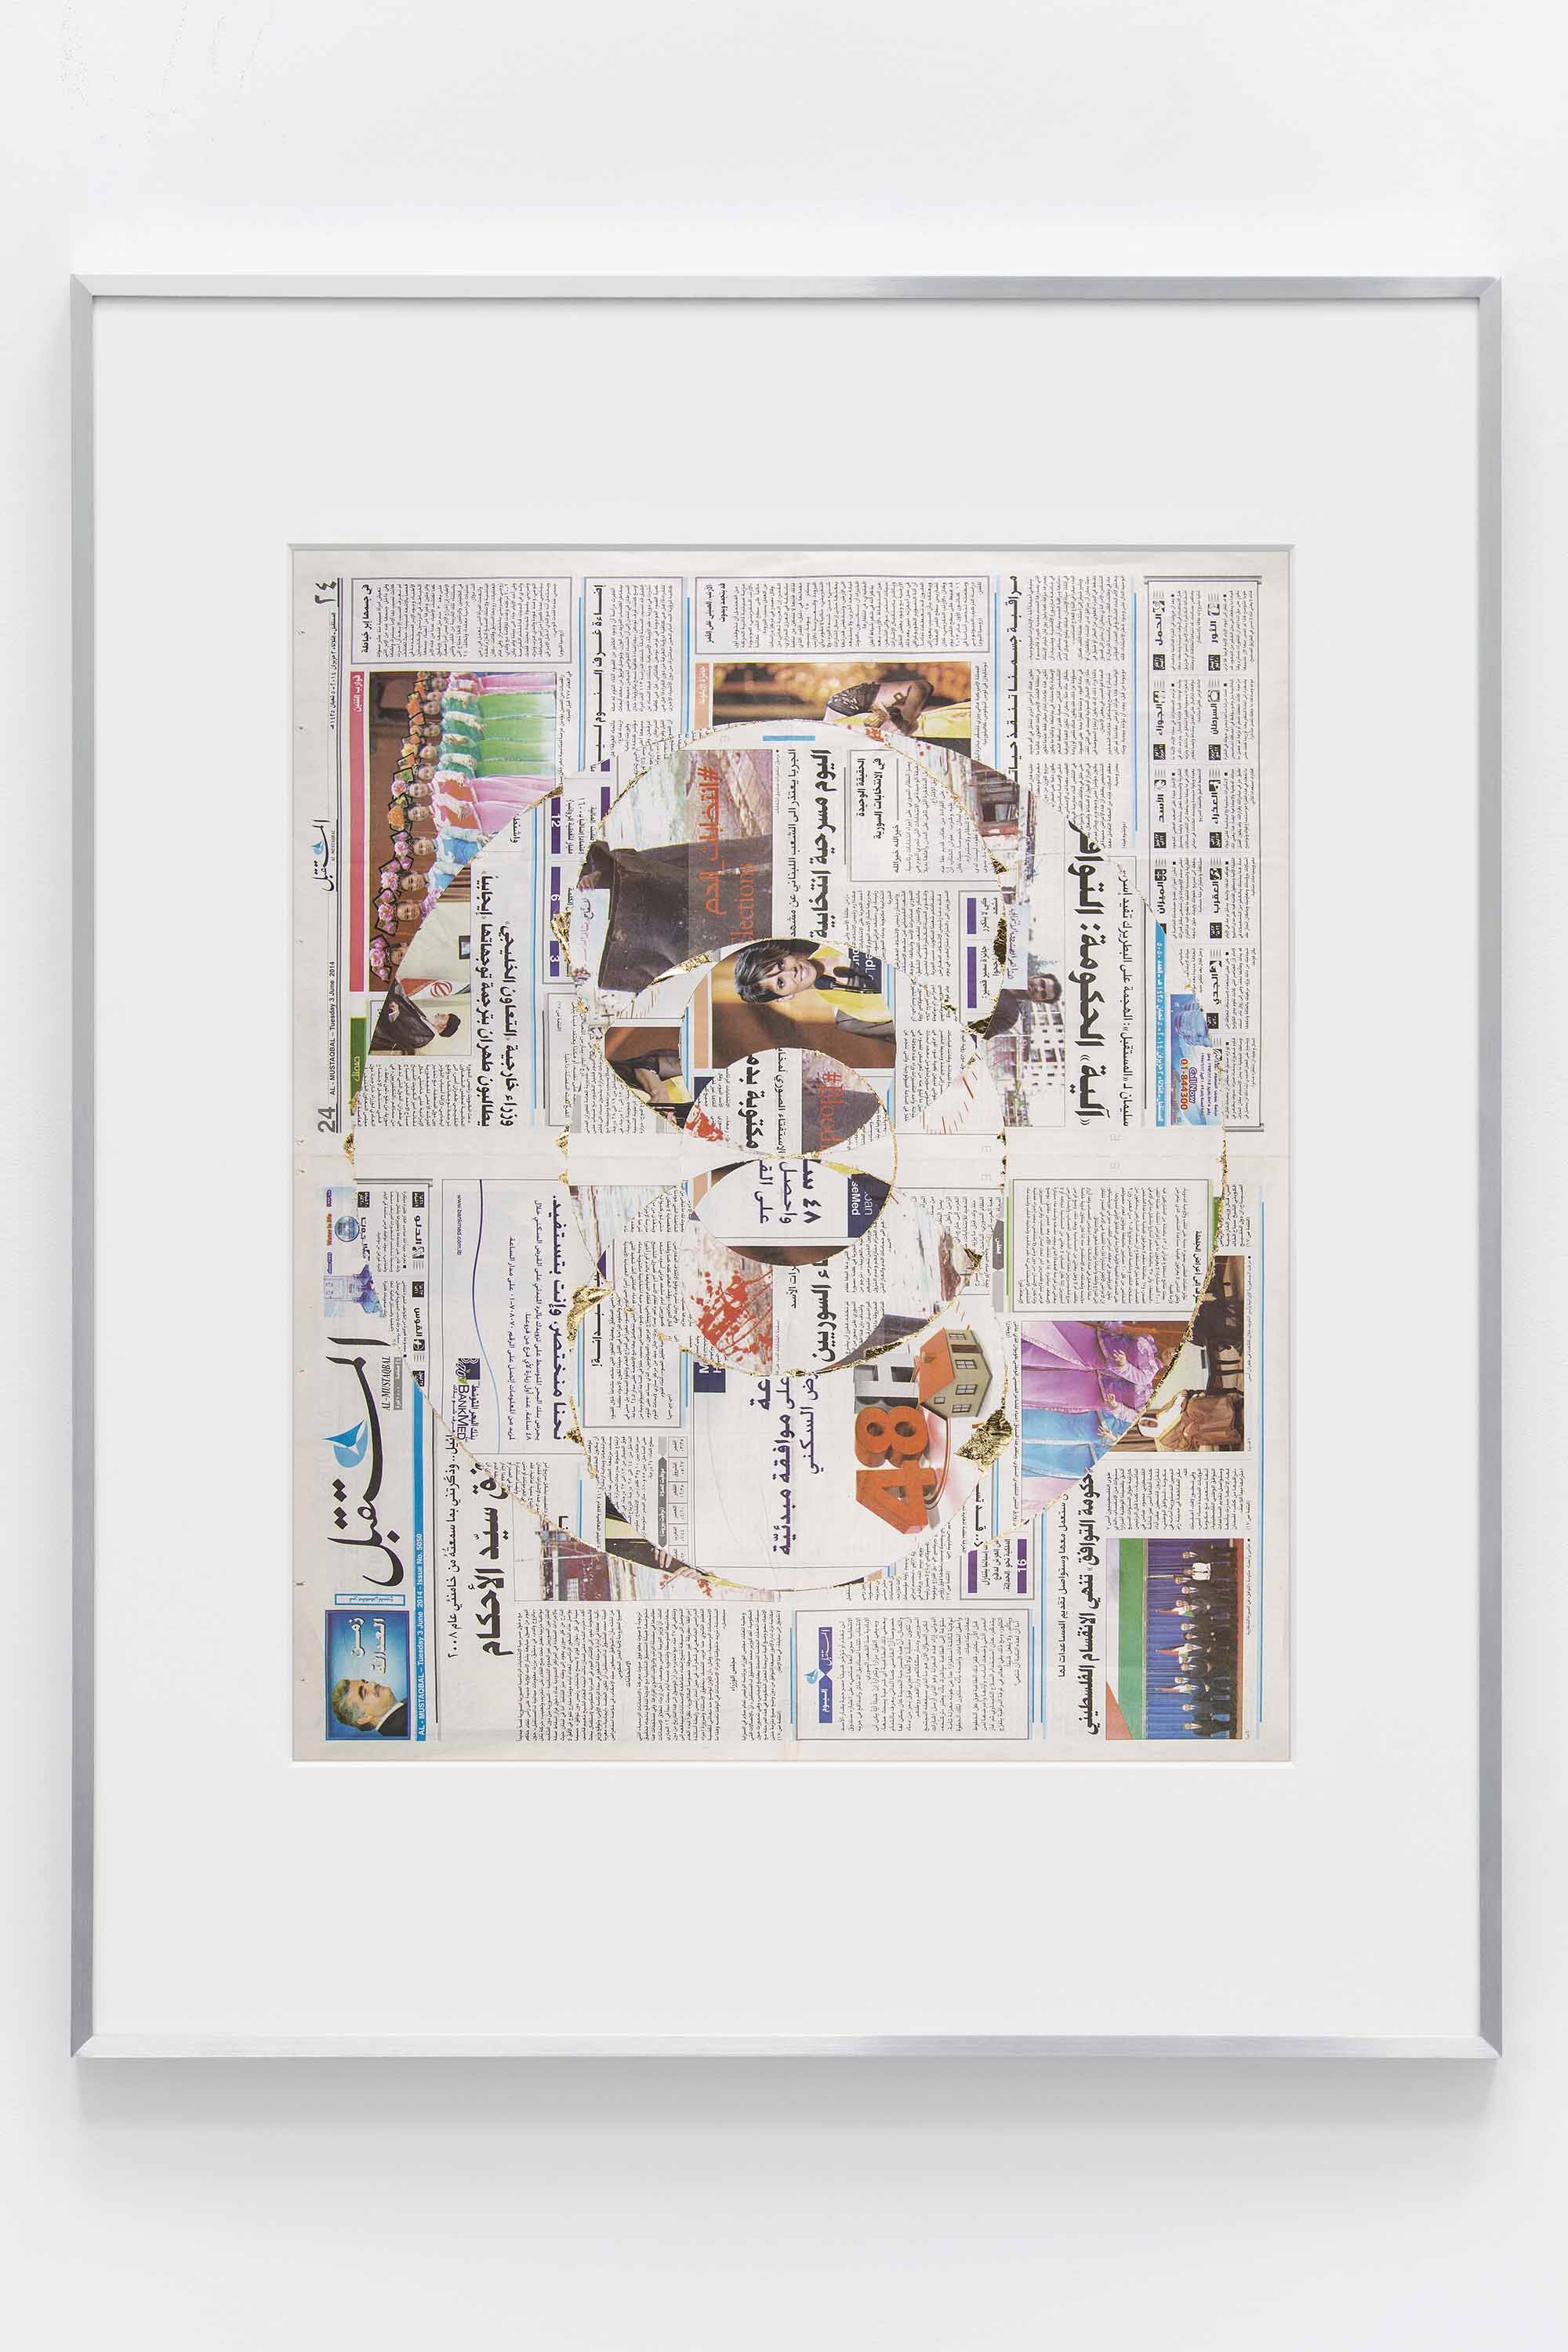   Blind Collage (Seven 180º Rotations, Al-Mustaqbal: Beirut, Lebanon, Tuesday, June 3, 2014)   2021  Newspaper, tape, and 22 karat gold leaf  39 1/8 x 31 1/4 inches   Blind Collages, 2017–   Exhibition:   Foreign Correspondence, 2021  